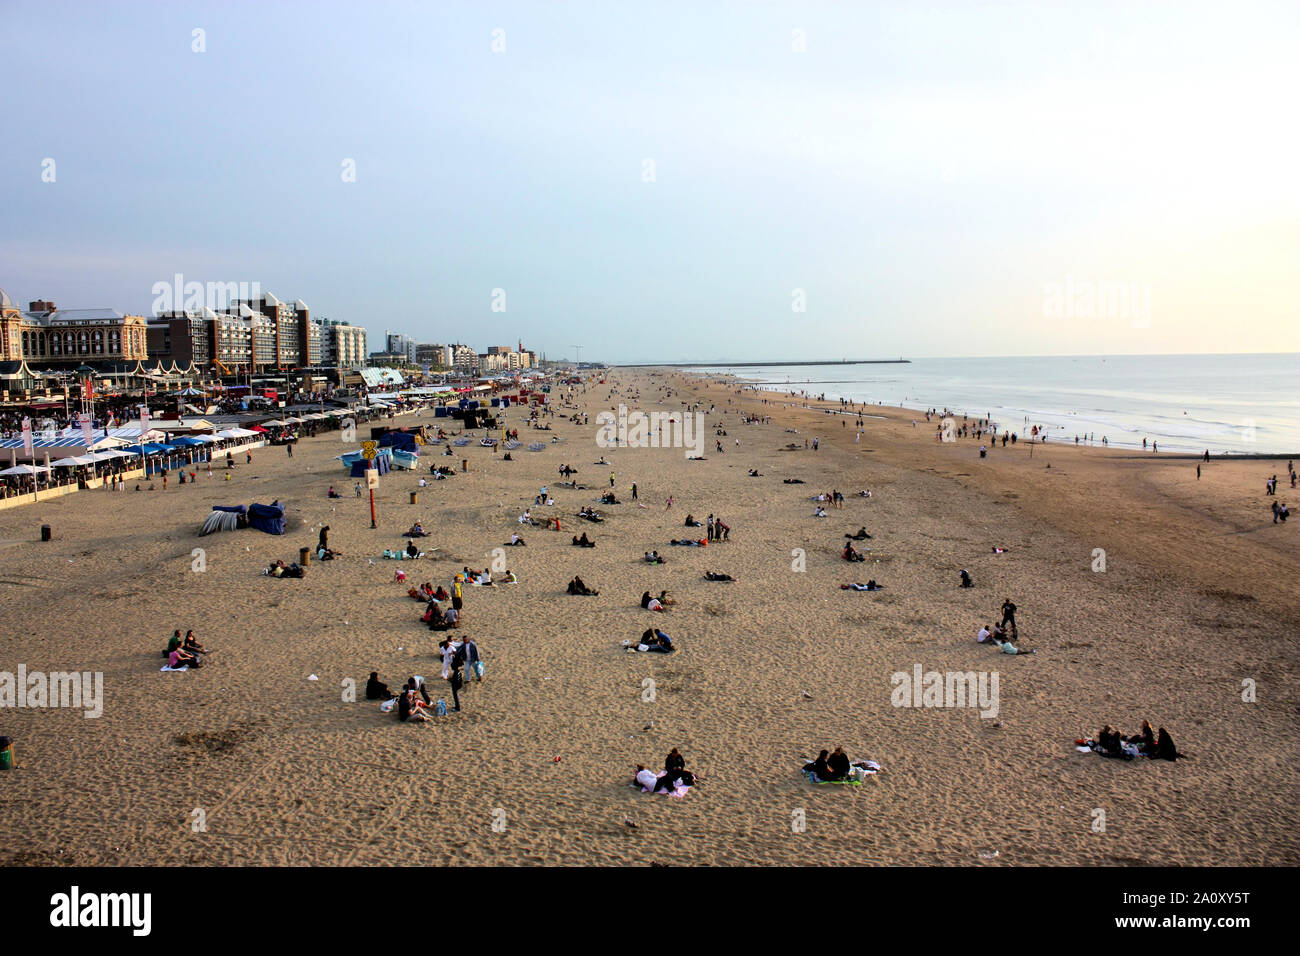 People like to enjoy the fresh open air in the summer evening at Scheveningen beach, the popular seaside resort in Holland. Stock Photo